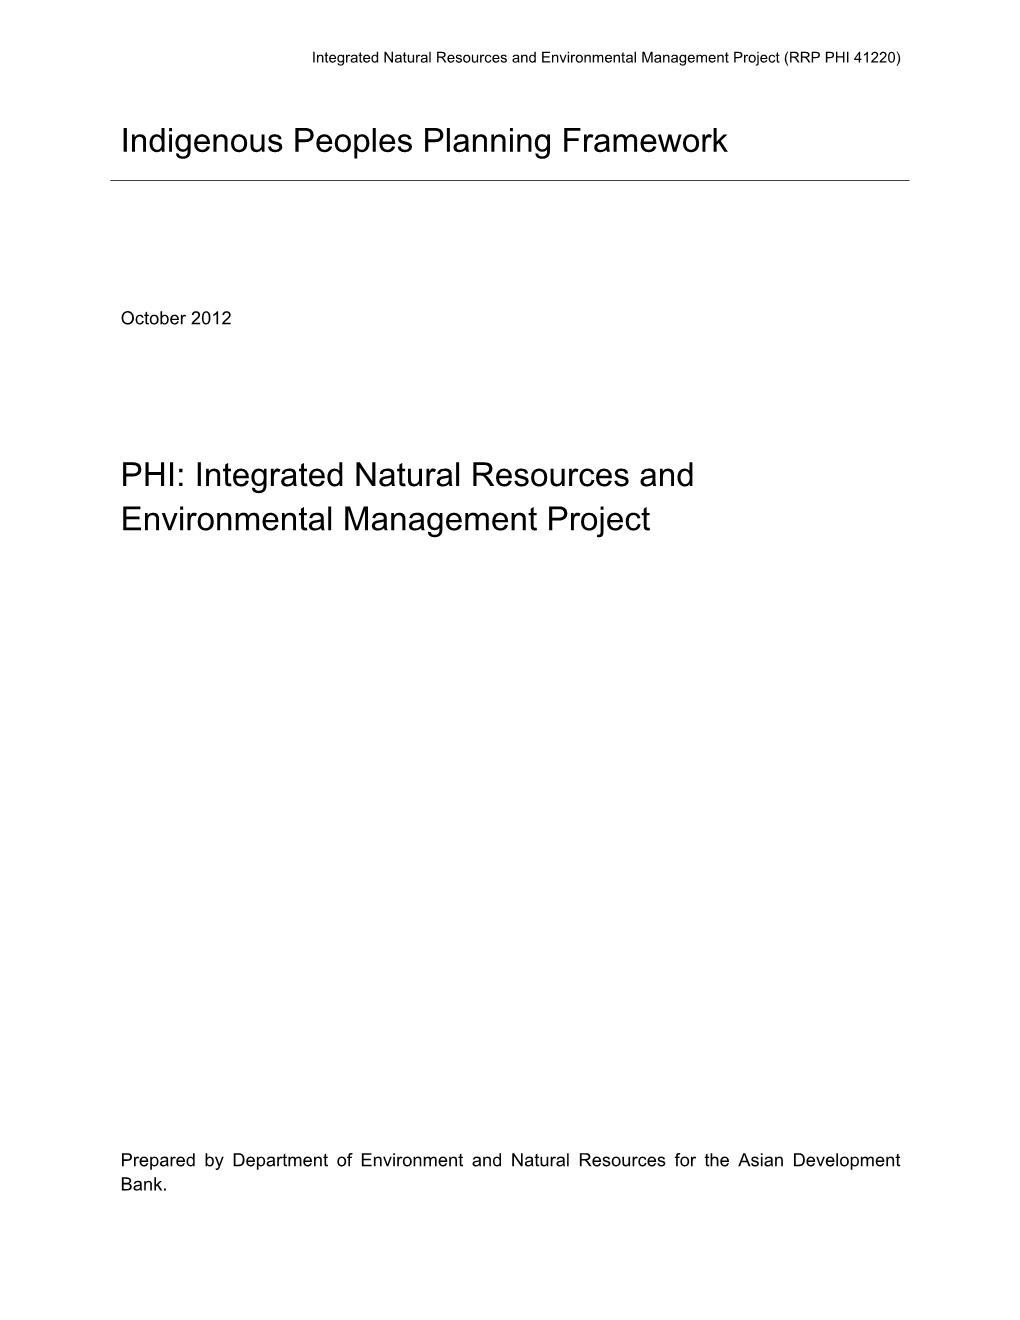 Indigenous Peoples Planning Framework PHI: Integrated Natural Resources and Environmental Management Project